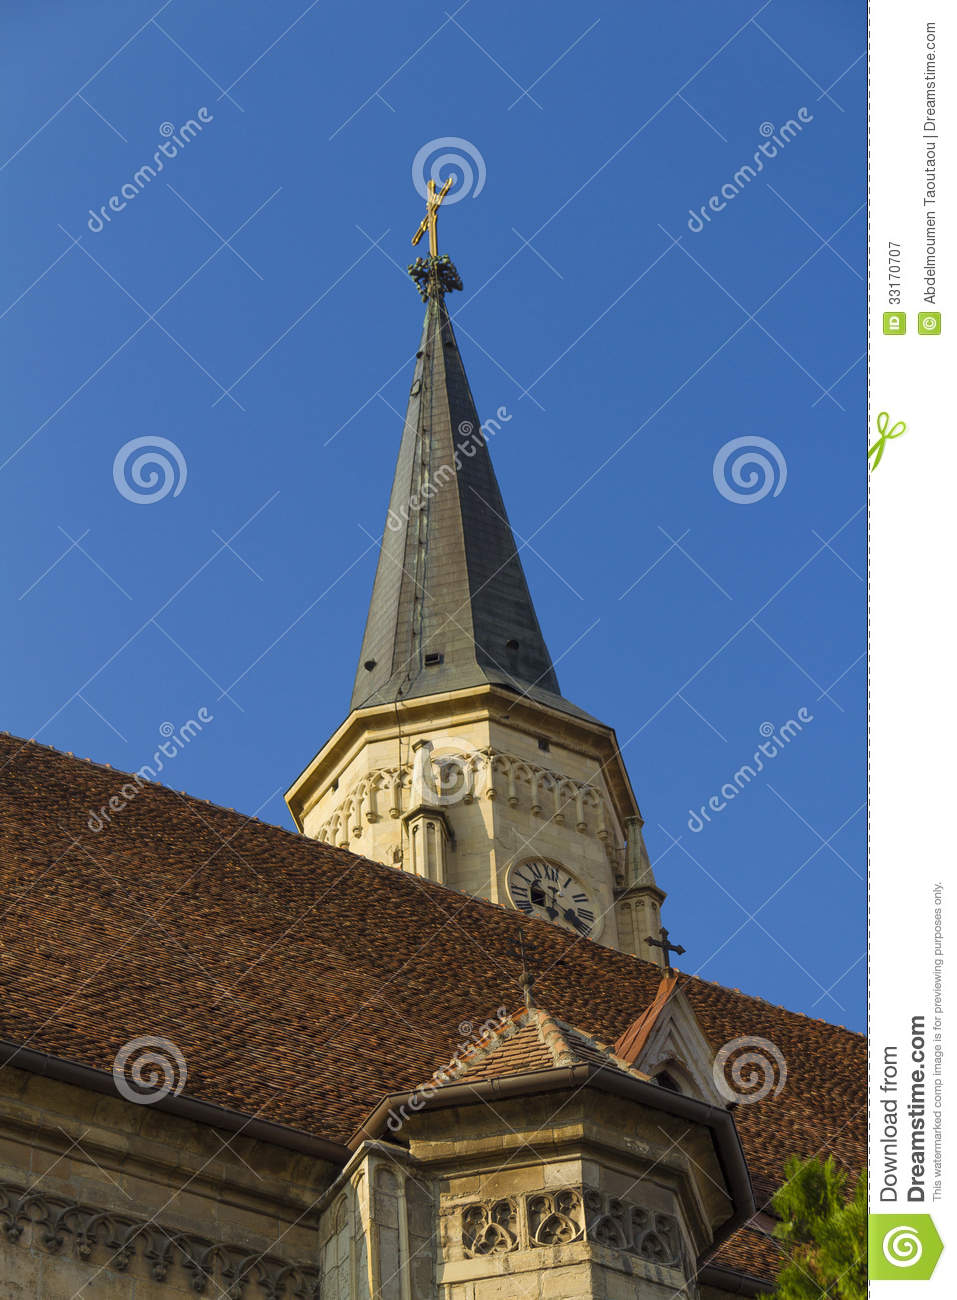 Church Roof Royalty Free Stock Photography   Image  33170707